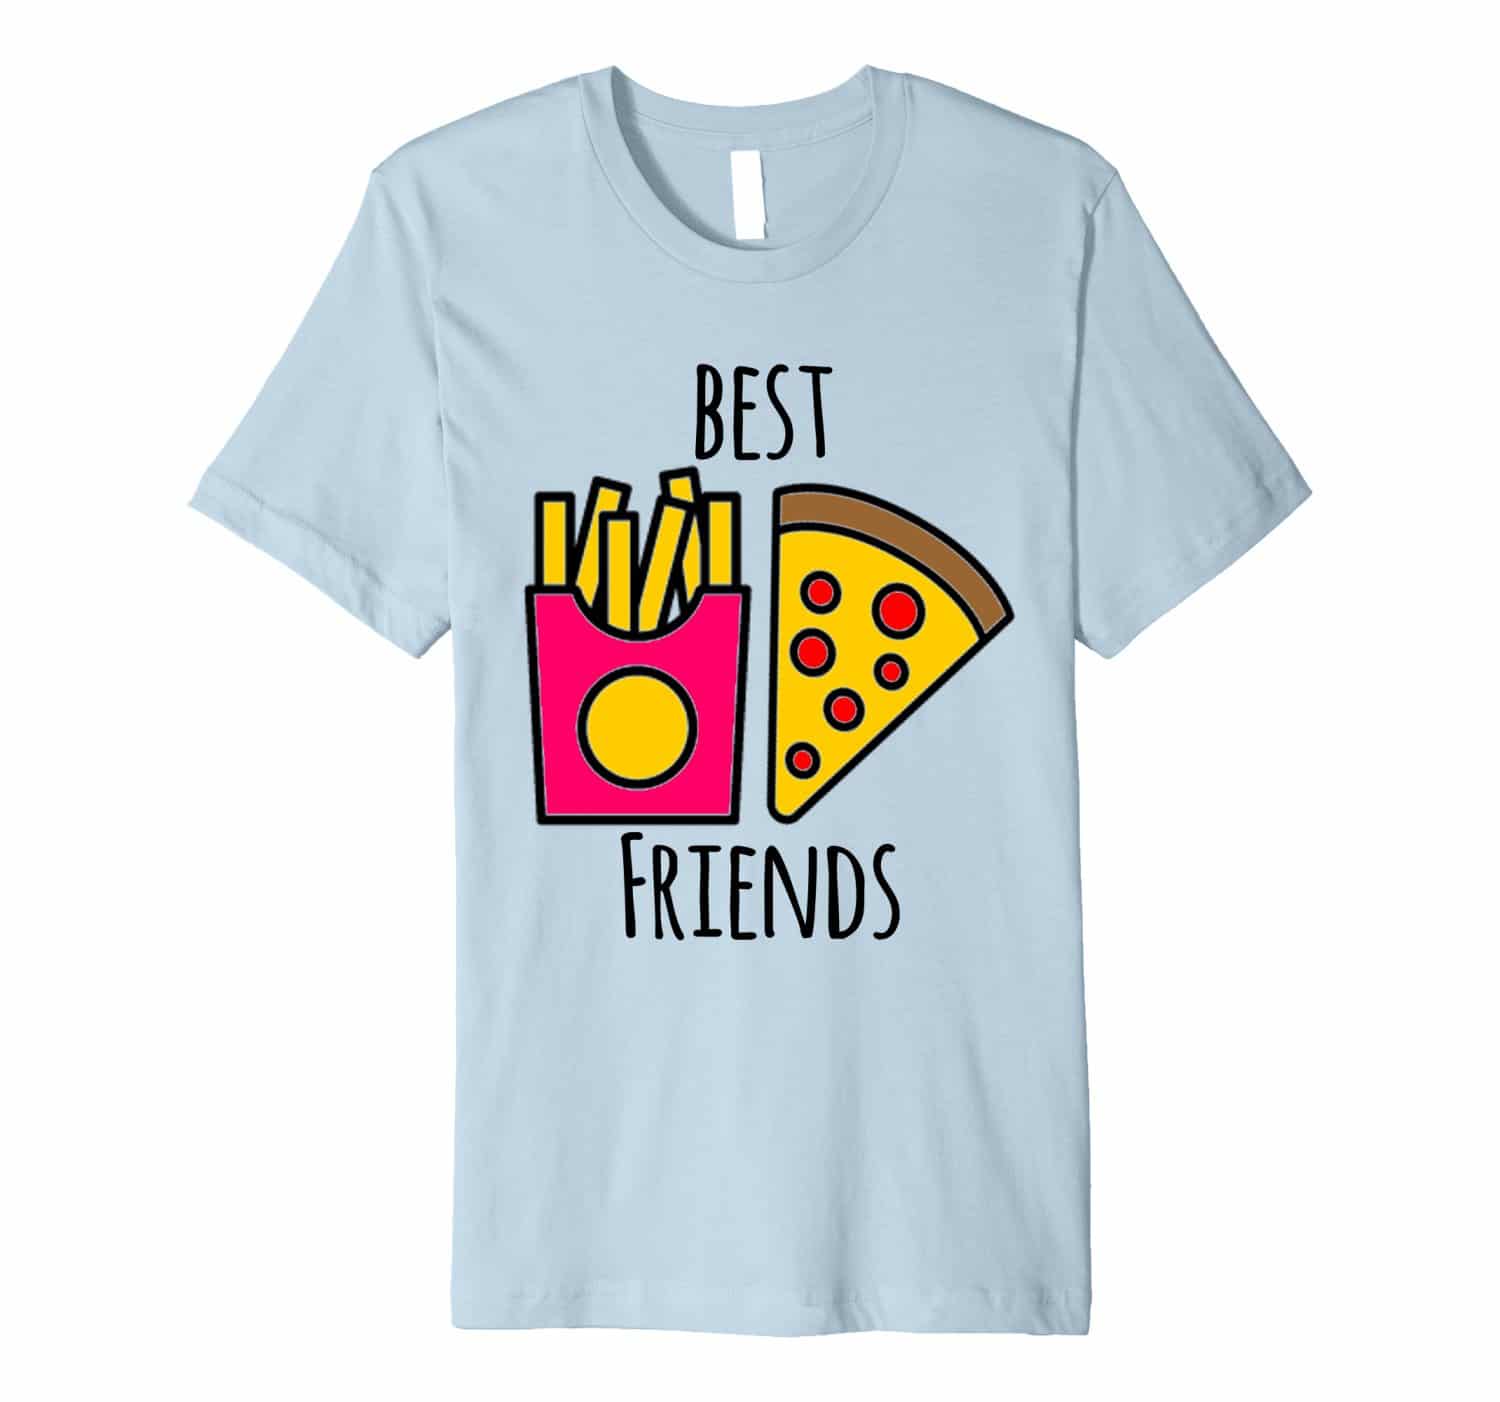 Funny Brother Gift Ideas 2018: Best Friend Tee in Blue